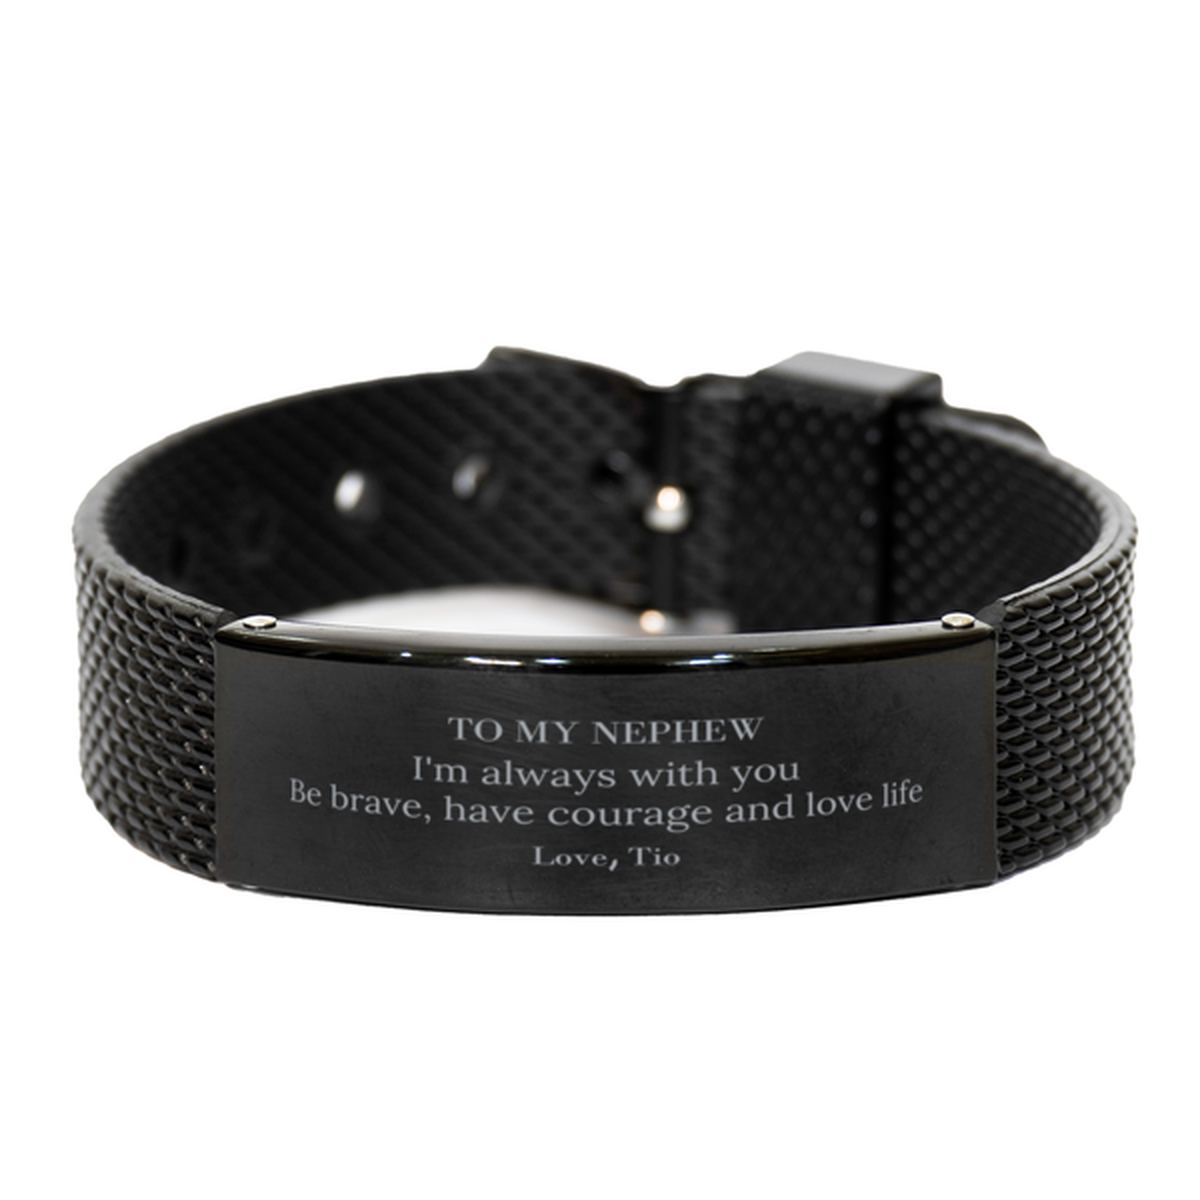 To My Nephew Gifts from Tio, Unique Black Shark Mesh Bracelet Inspirational Christmas Birthday Graduation Gifts for Nephew I'm always with you. Be brave, have courage and love life. Love, Tio